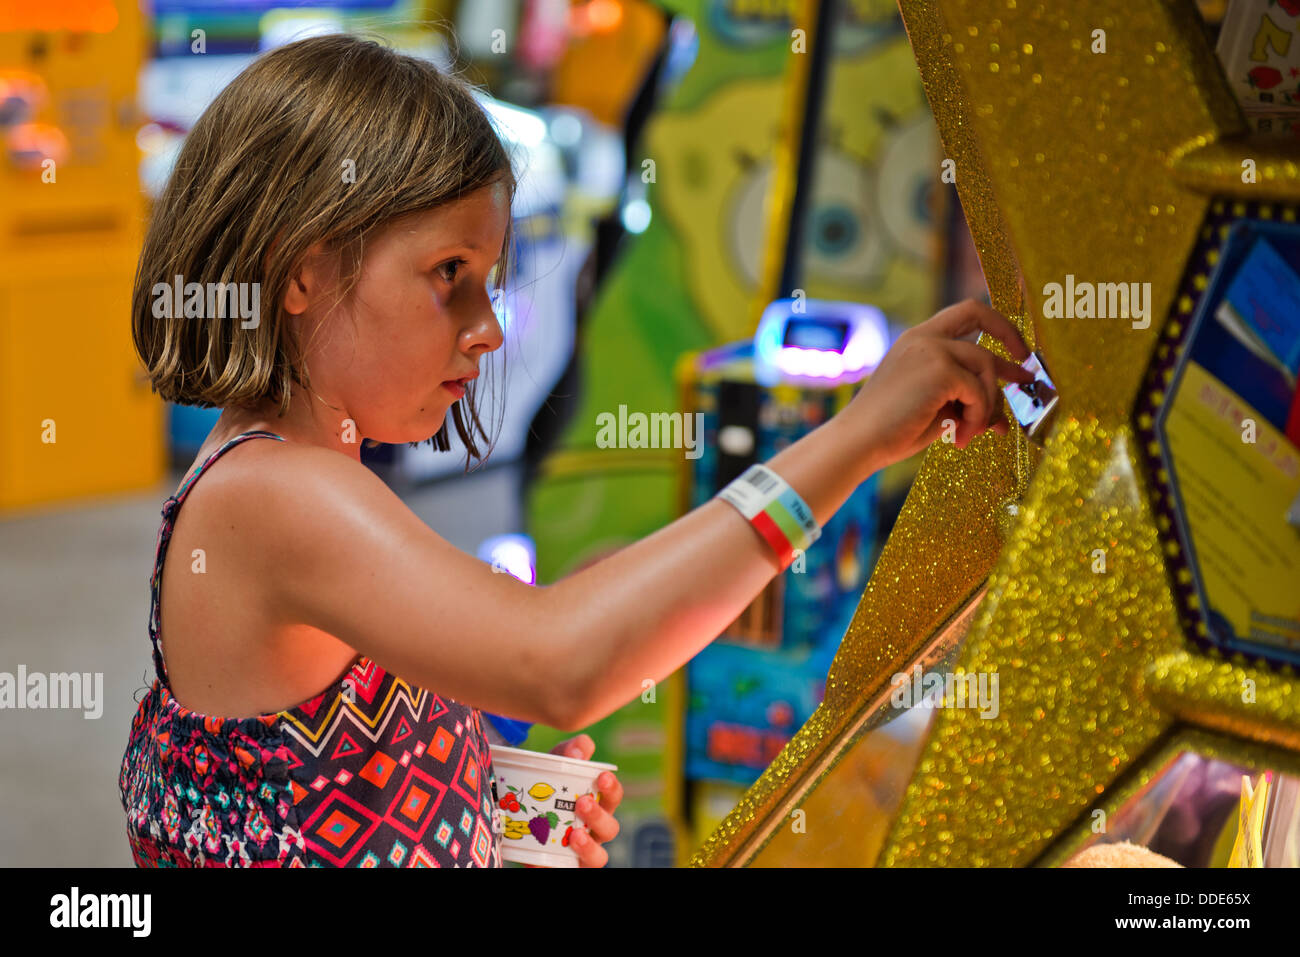 Model released image of a young girl playing in the amusement arcades at Southend on Sea, Essex. Stock Photo